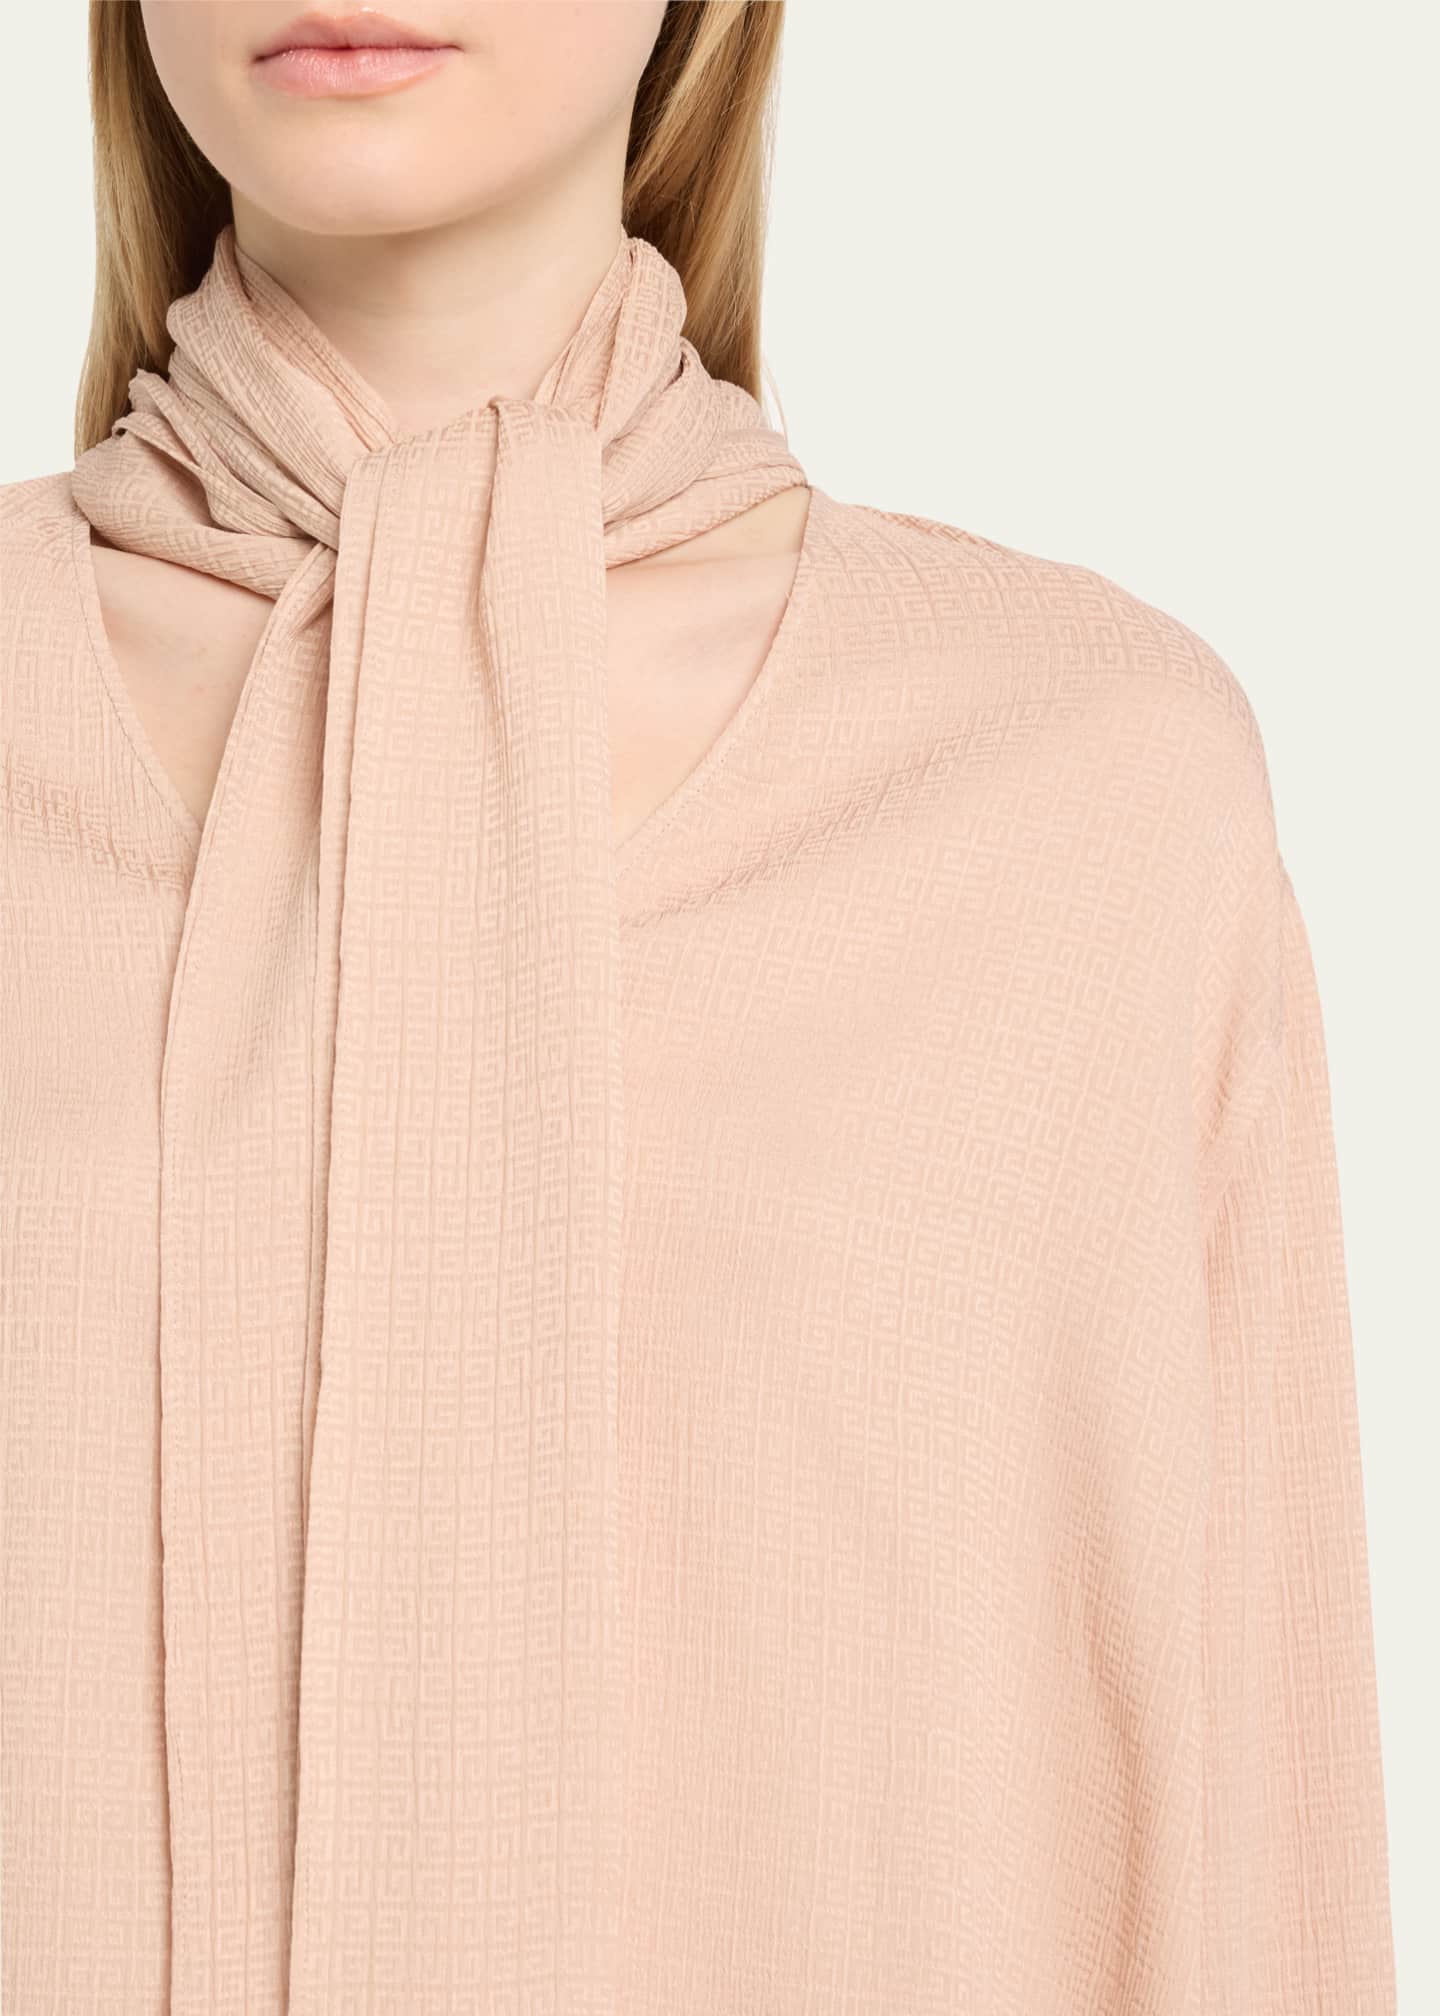 Givenchy Lavaliere Scarf-Neck Silk Blouse - Bergdorf Goodman